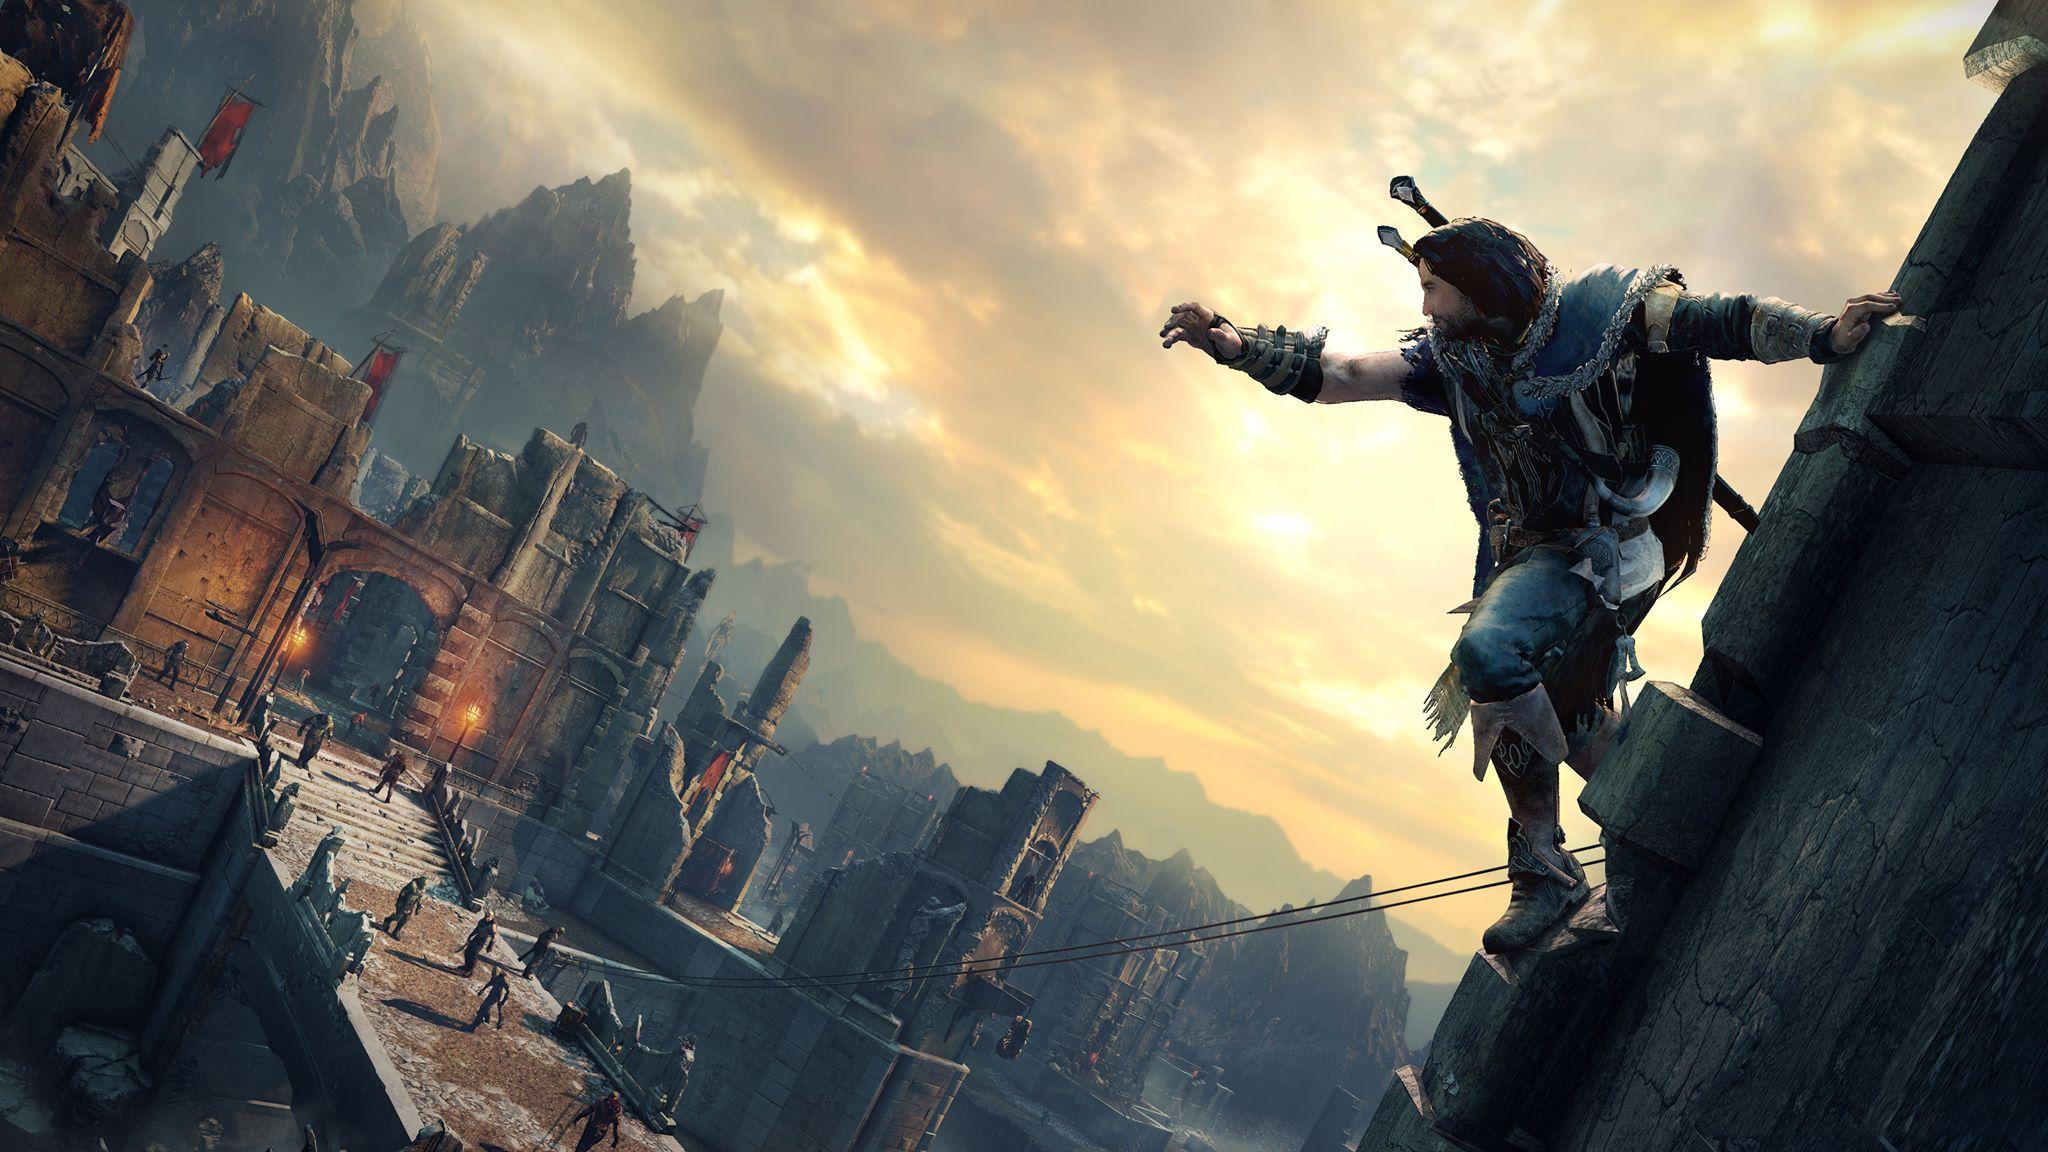 Shadow Of Mordor wallpapers – wallpapers free download